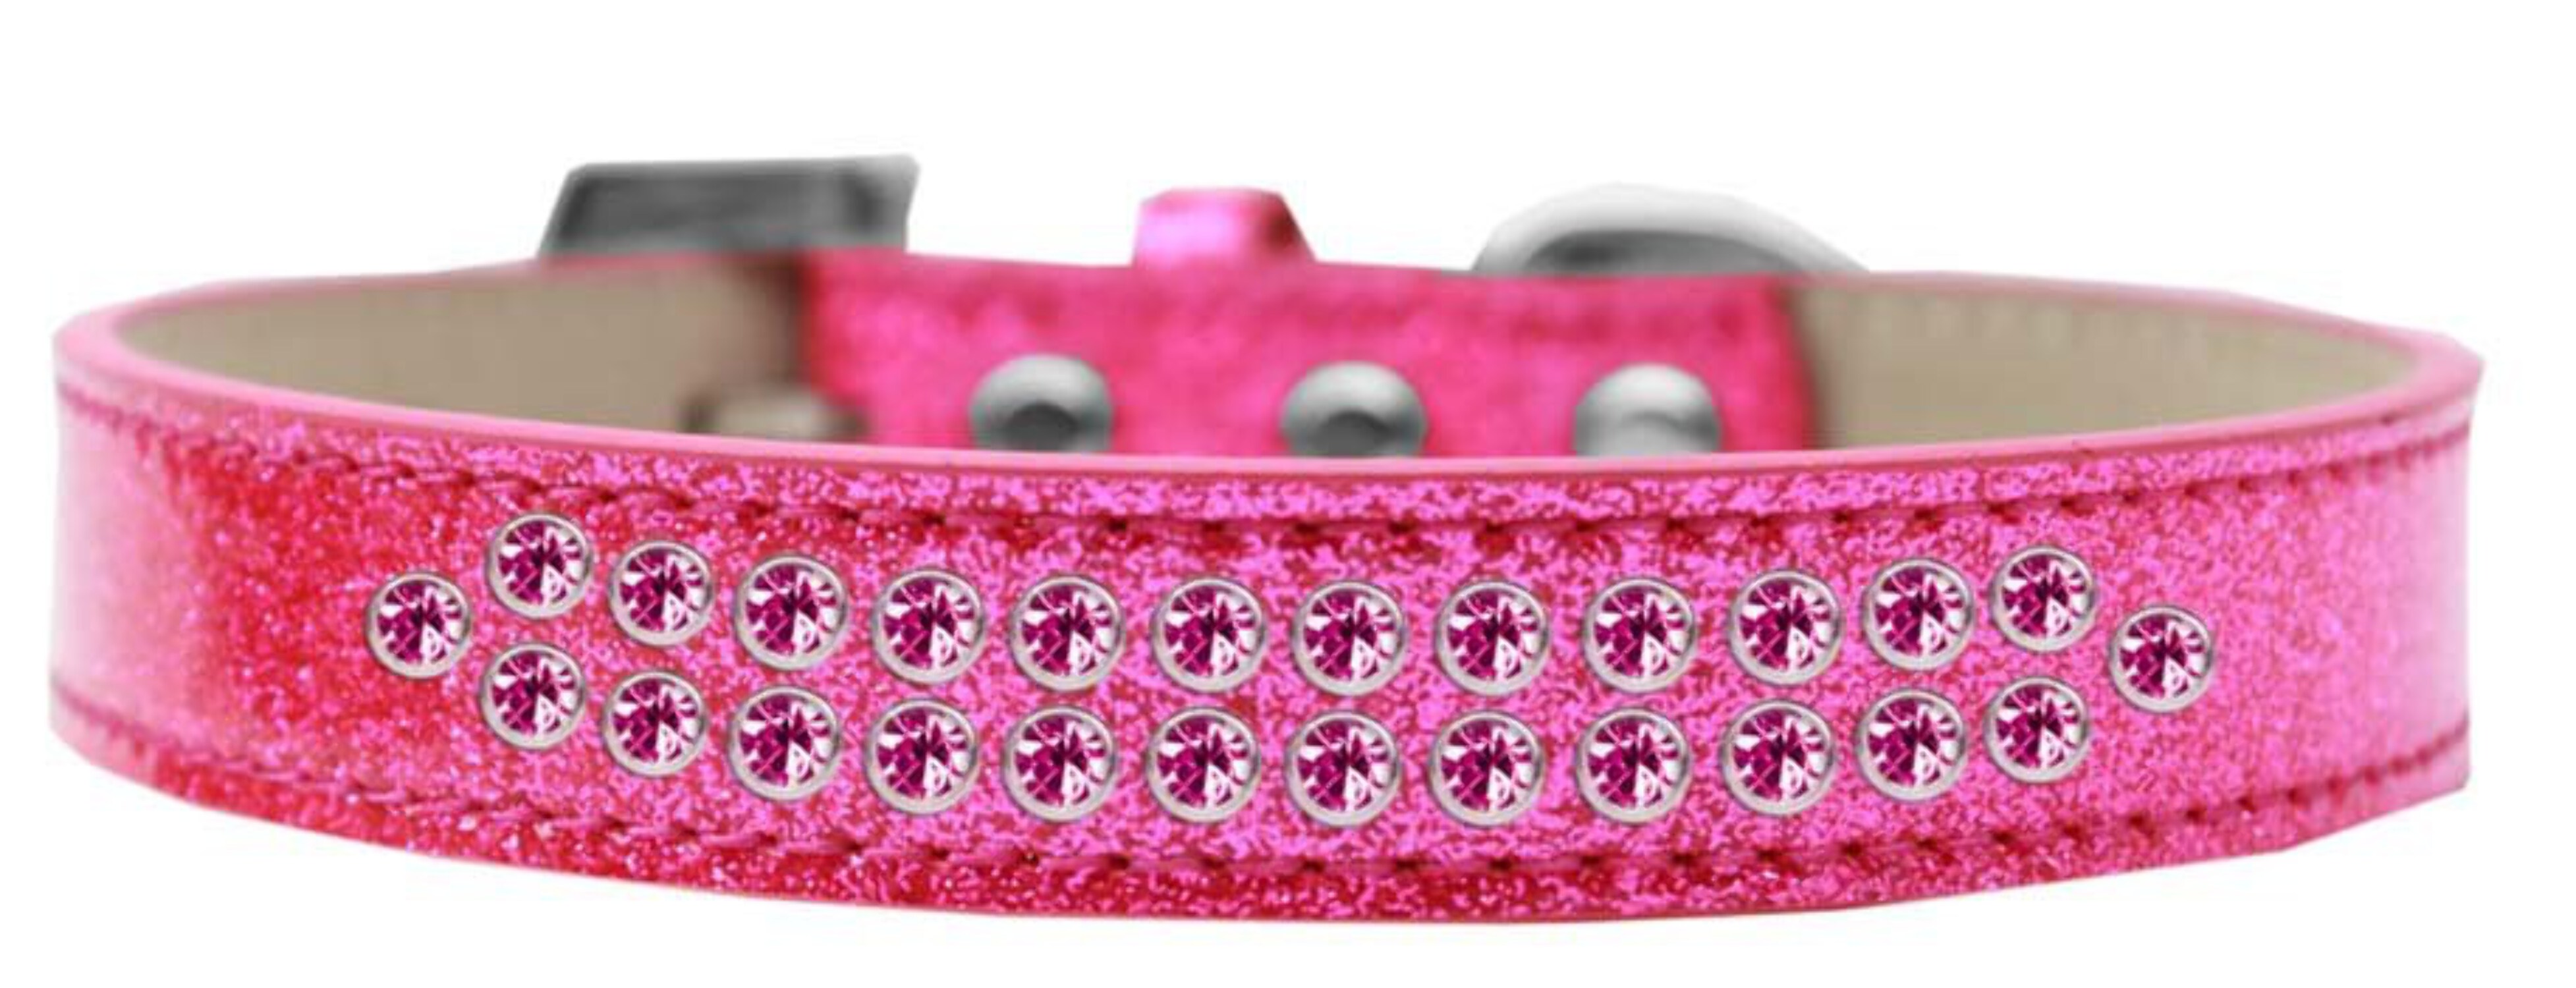 Mirage Pet Two Row Bright Pink Crystal Size 16 Emerald Green Ice Cream Dog Collar - image 3 of 5